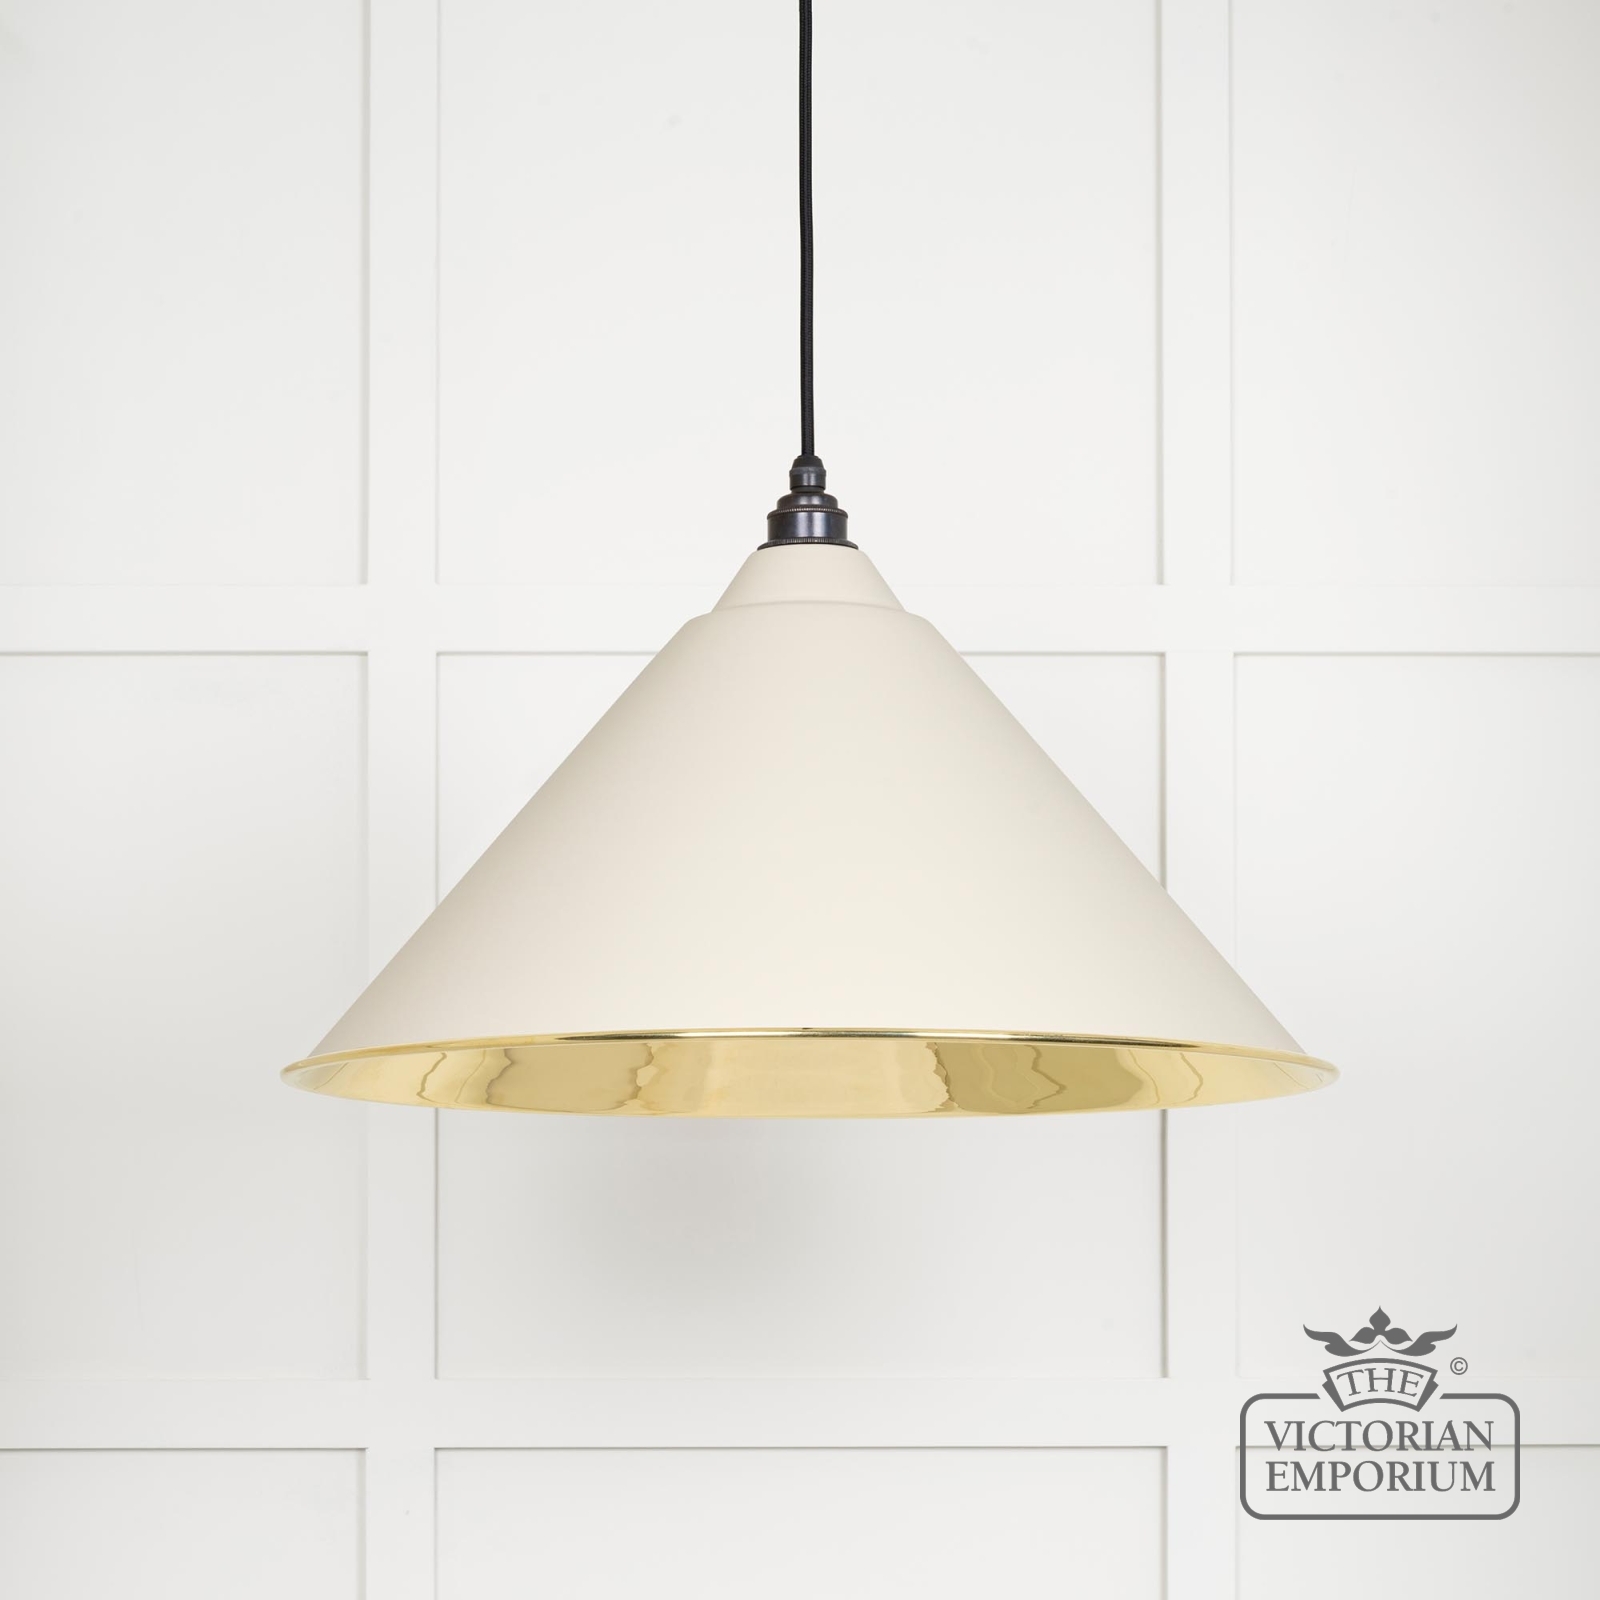 Hockliffe pendant in Teasel and Smooth Brass